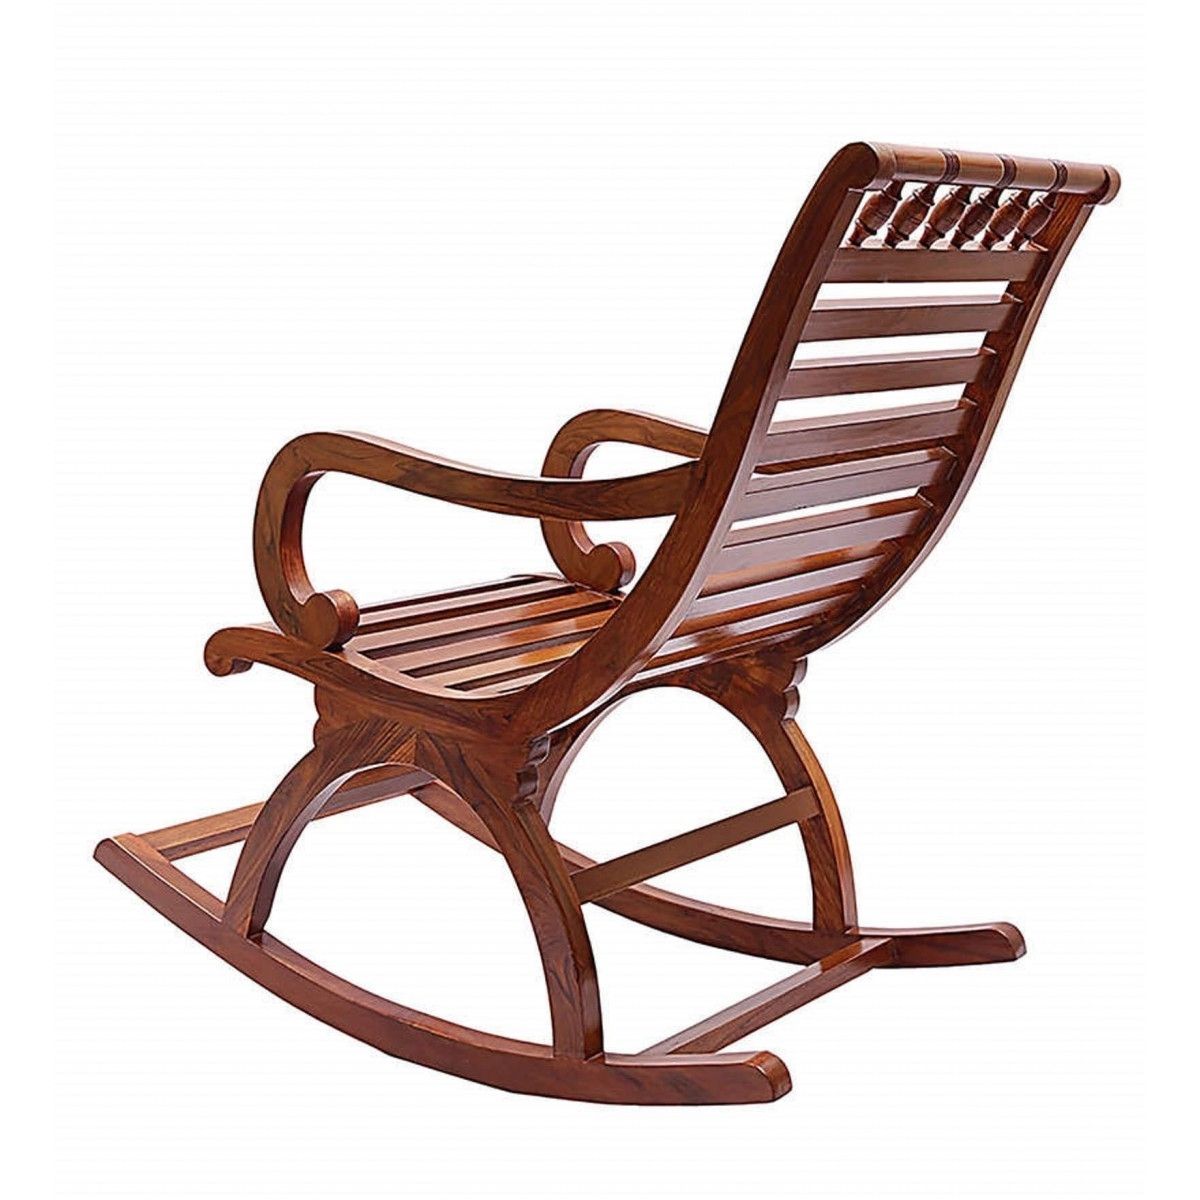 Widely Used Helms Arm Chairs With Rocking Chairs Online  Shop Wooden Rocking Chair At Here !! (View 11 of 20)